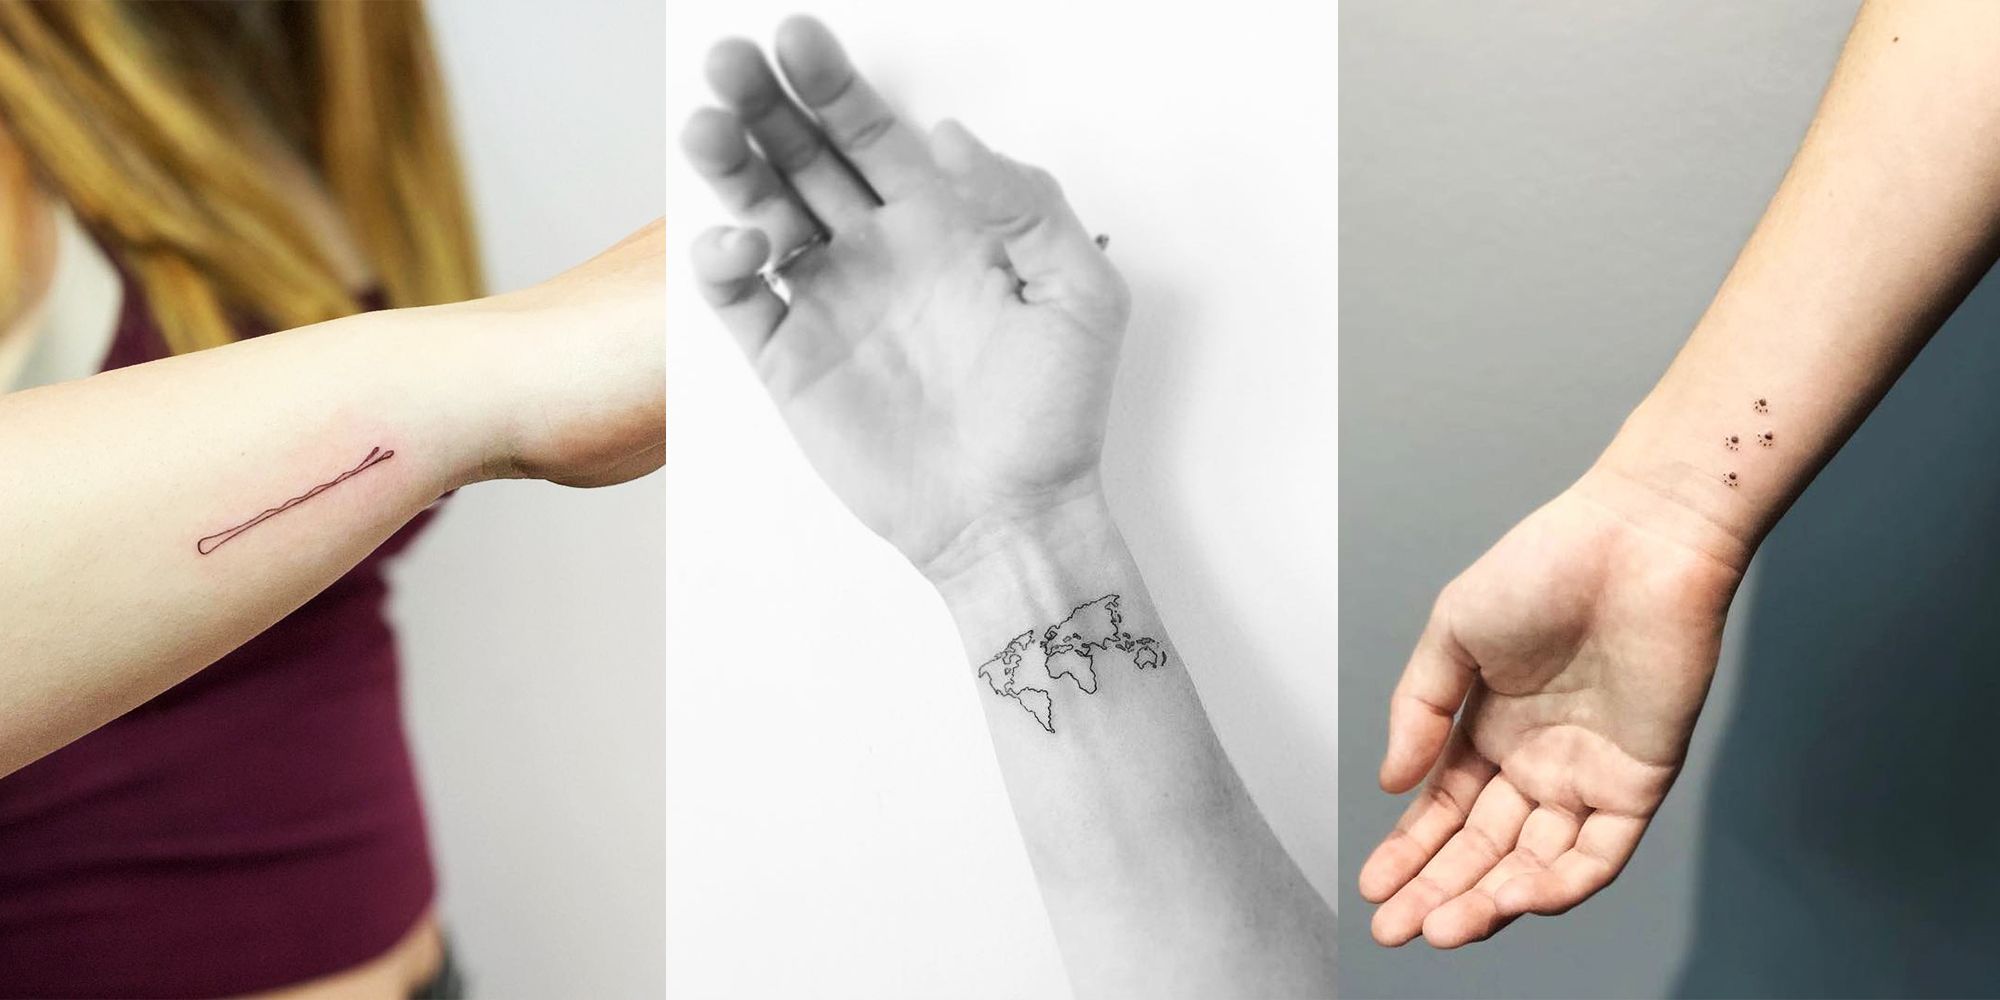 23 Hottest Star Tattoo Designs You'll Love - Styleoholic